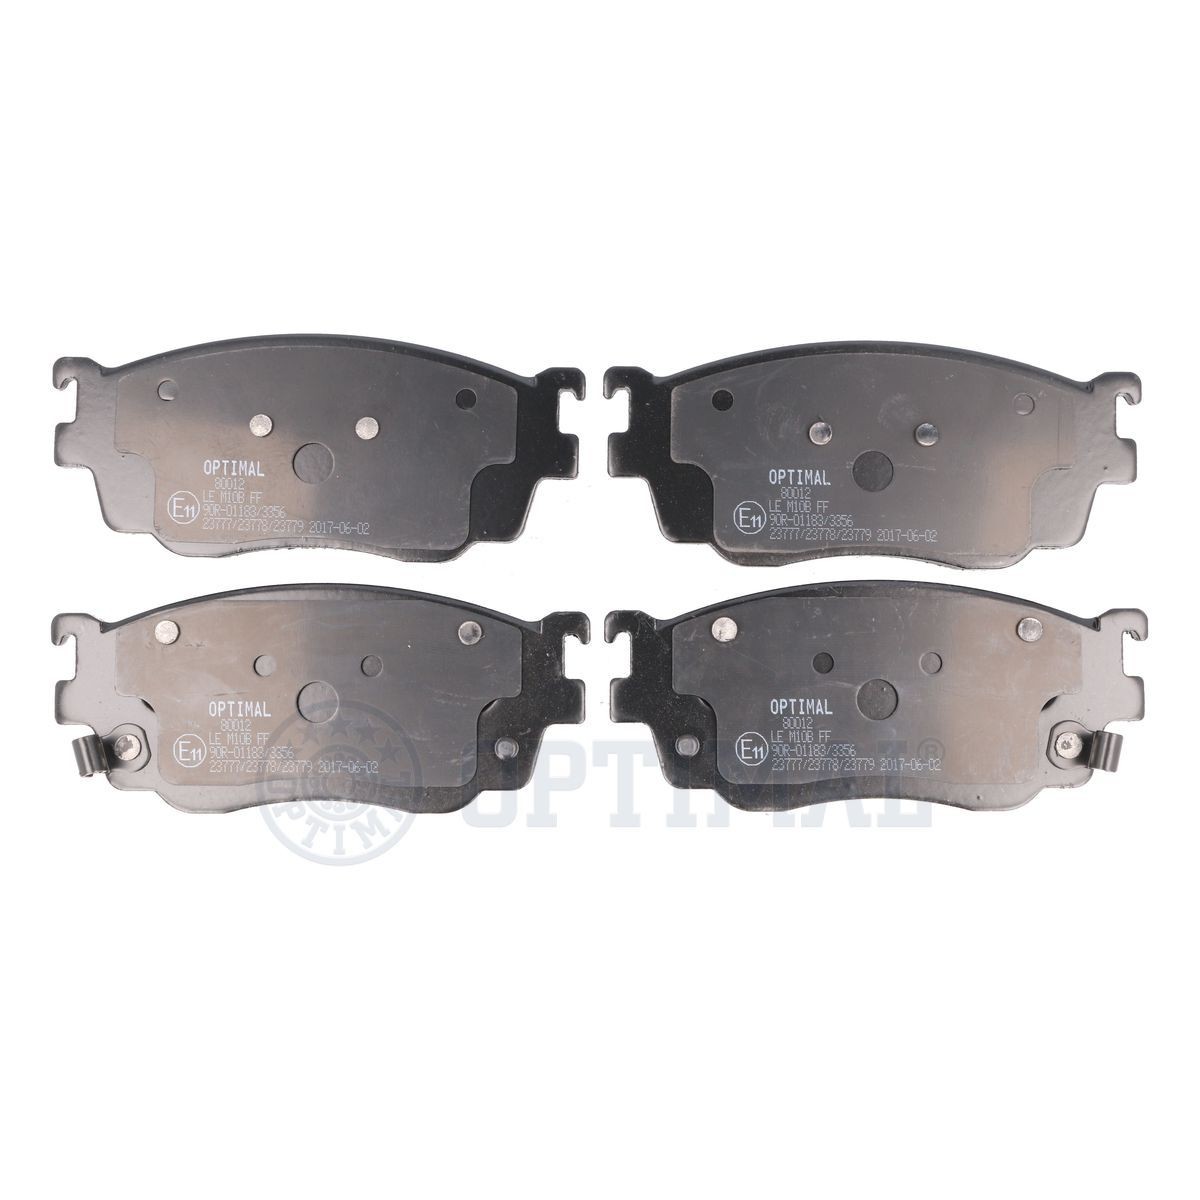 OPTIMAL BP-80012 Brake pad set Front Axle, with acoustic wear warning